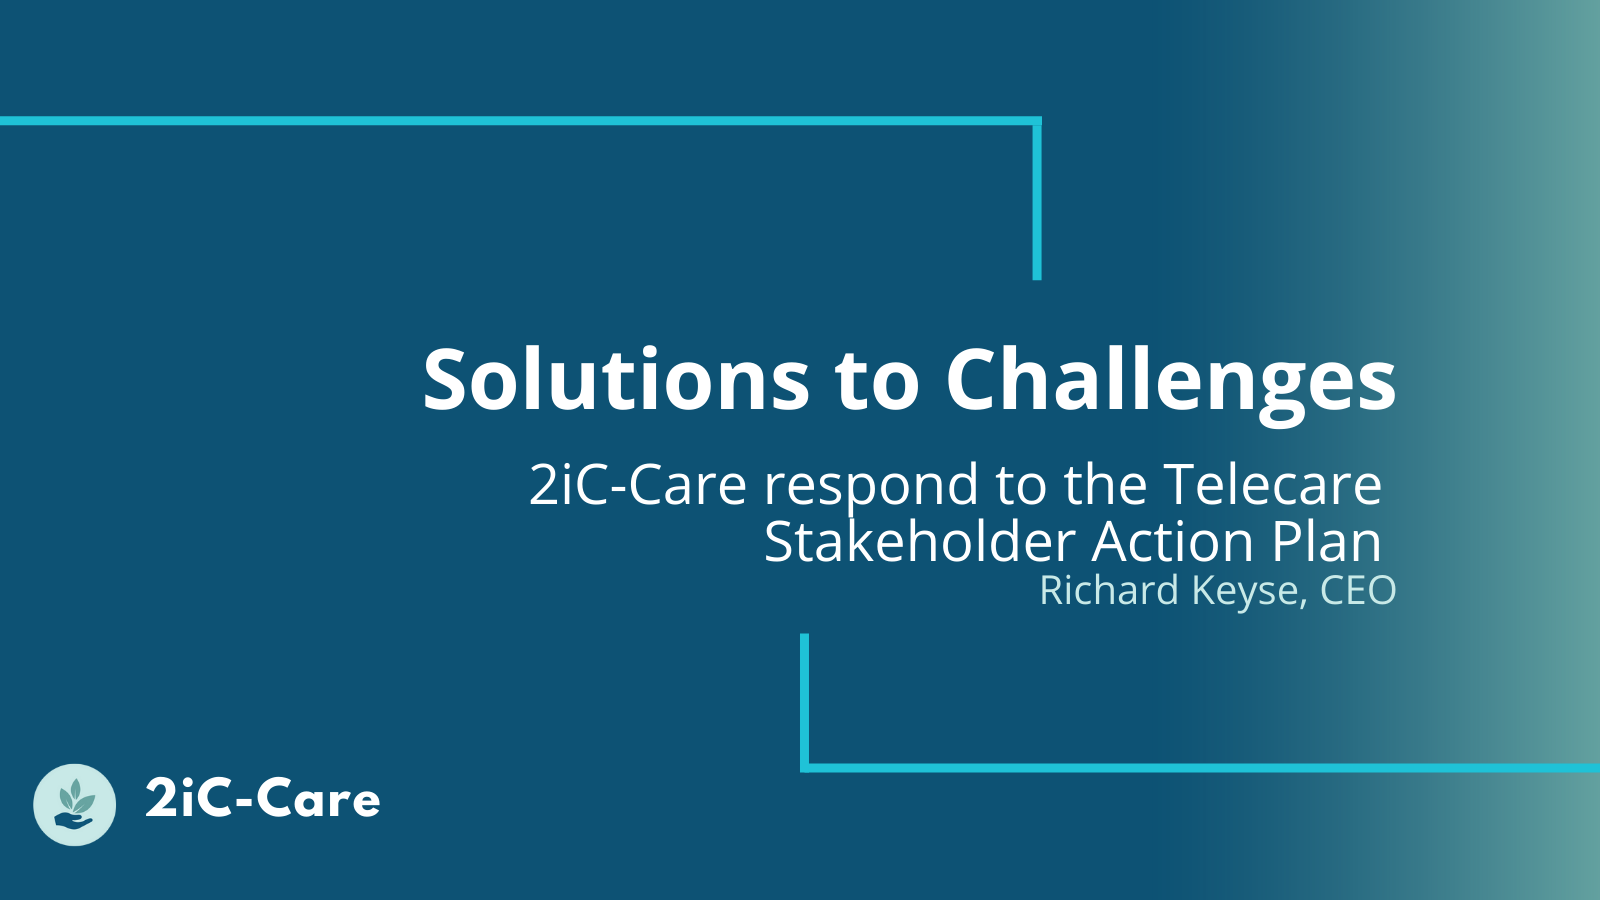 2iC-Care provides solutions to telecare action plan